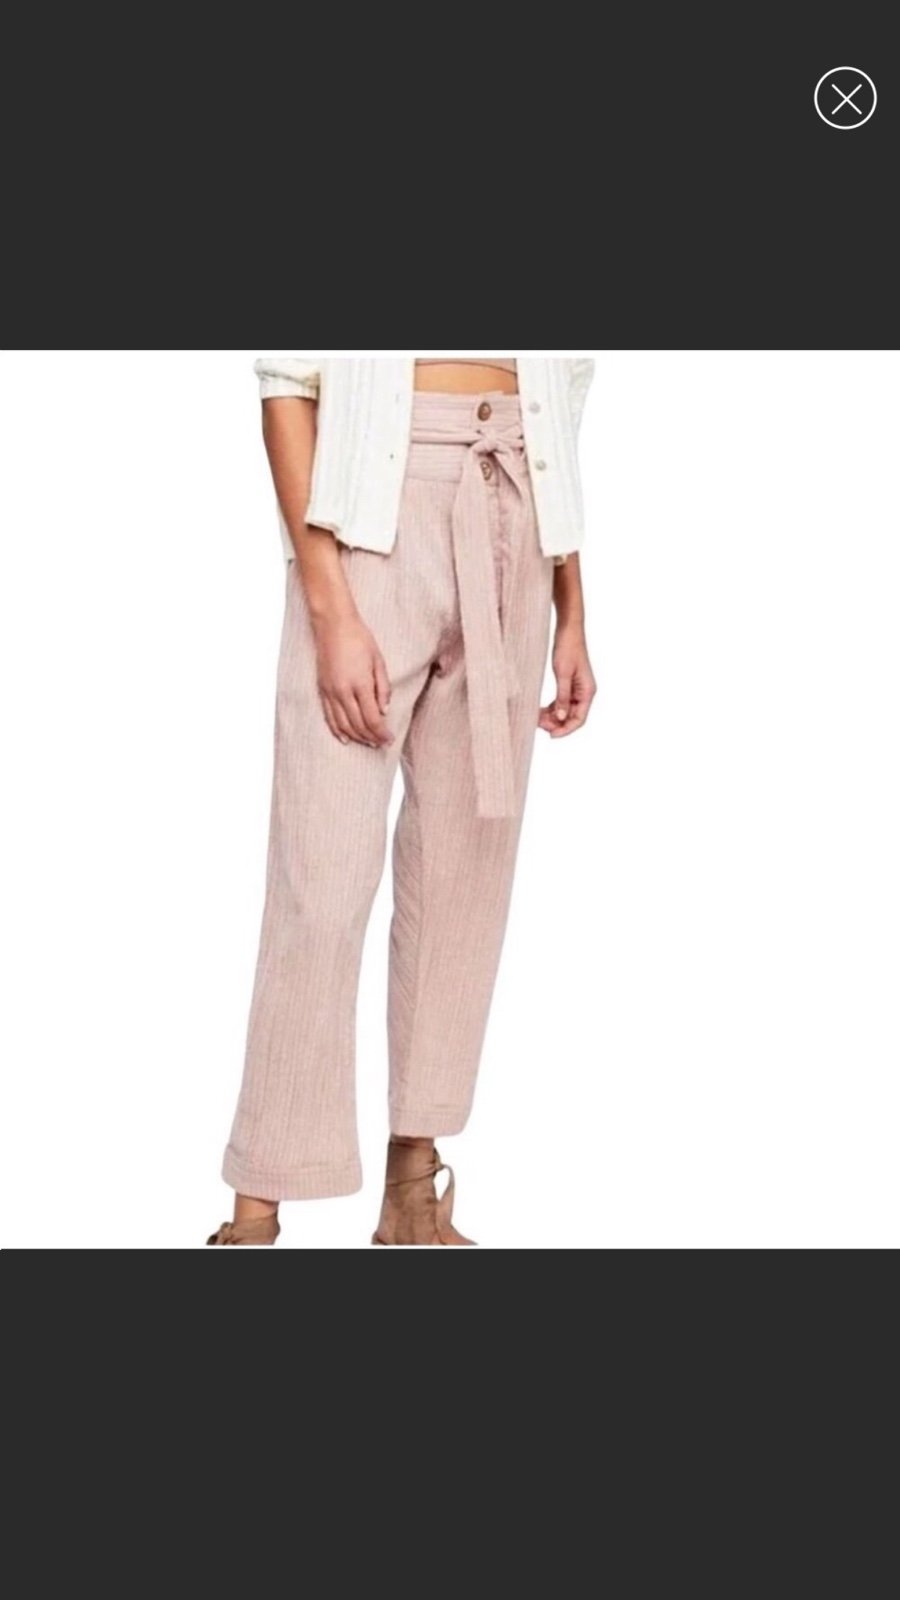 Fashion Free People Rumors Yarn dyed harem striped high waist toe belted pants size 0 gYJbseLgw Hot Sale